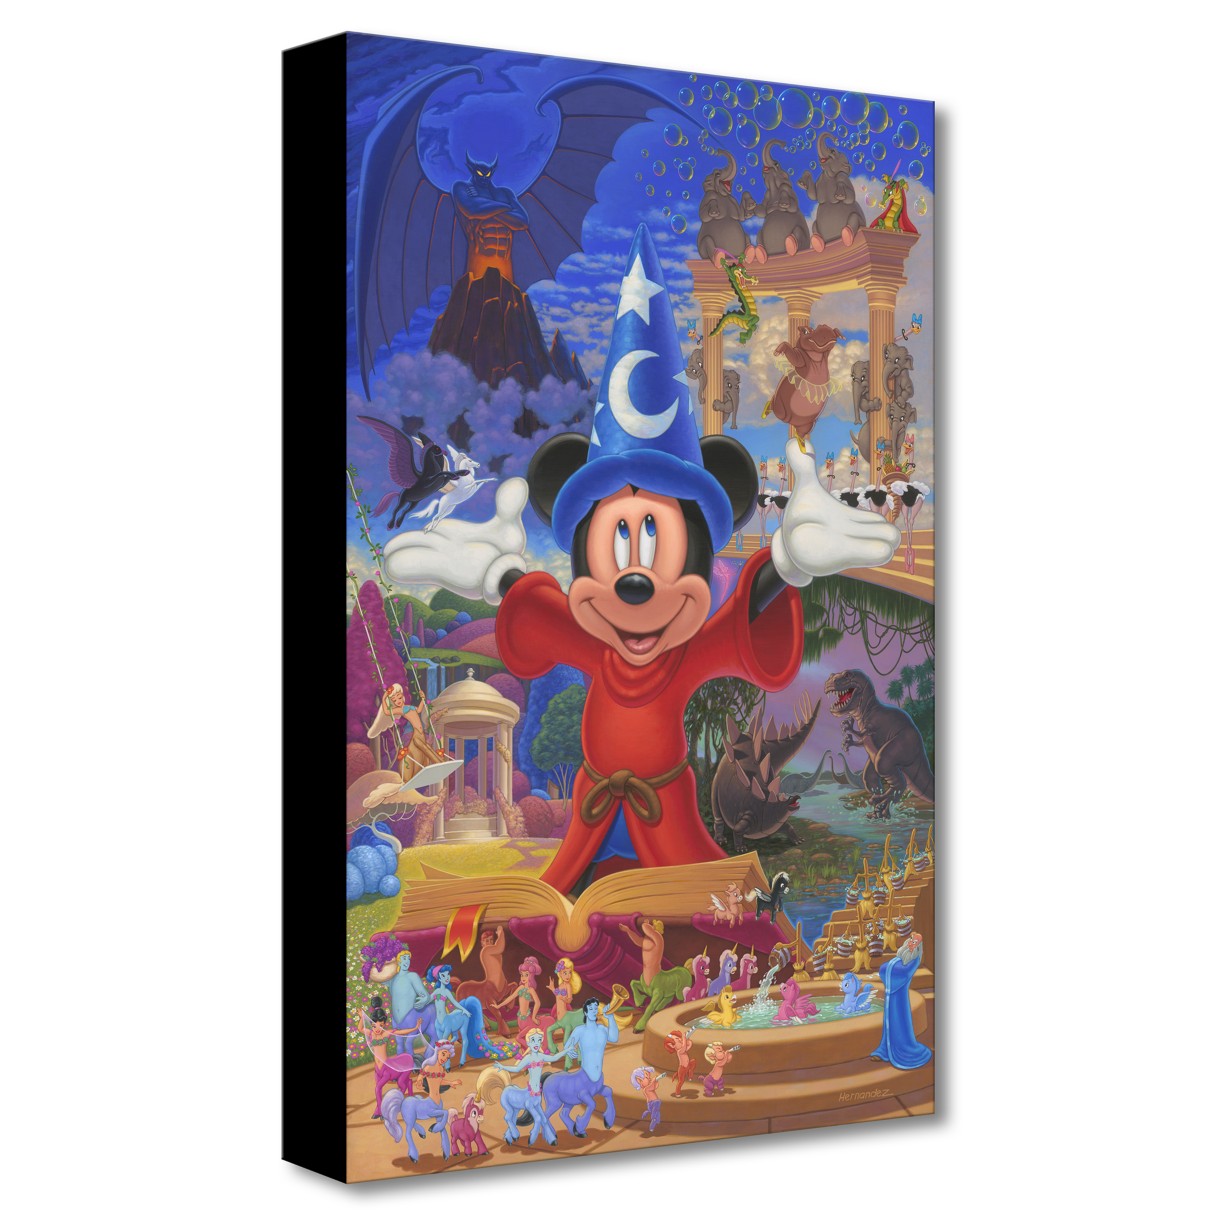 Fantasia ''Story of Music and Magic'' Giclée on Canvas by Manuel Hernandez – Limited Edition